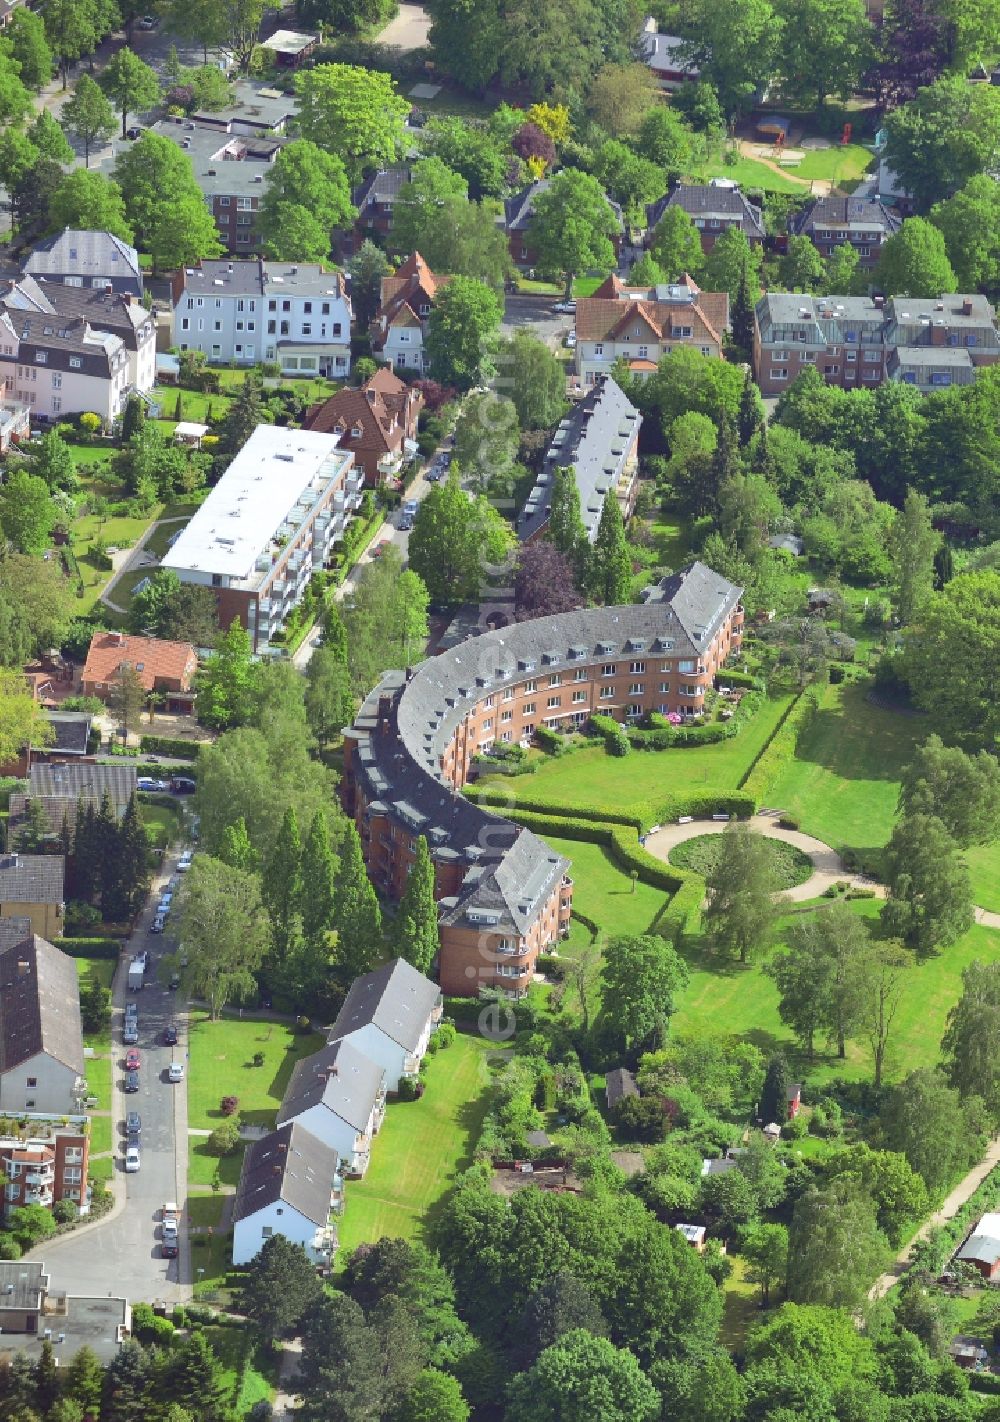 Aerial photograph Lübeck - Draeger Park and residential buildings in the Marli part of St.Gertrud in Luebeck in the state of Schleswig-Holstein. St.Gertrud is the Easternmost historic suburb of Luebeck. Located on the riverbank of the Wakenitz, there are several green areas such as Draegerpark and historic residential buildings. The red, semi-circular building with the adjacent park is especially distinct